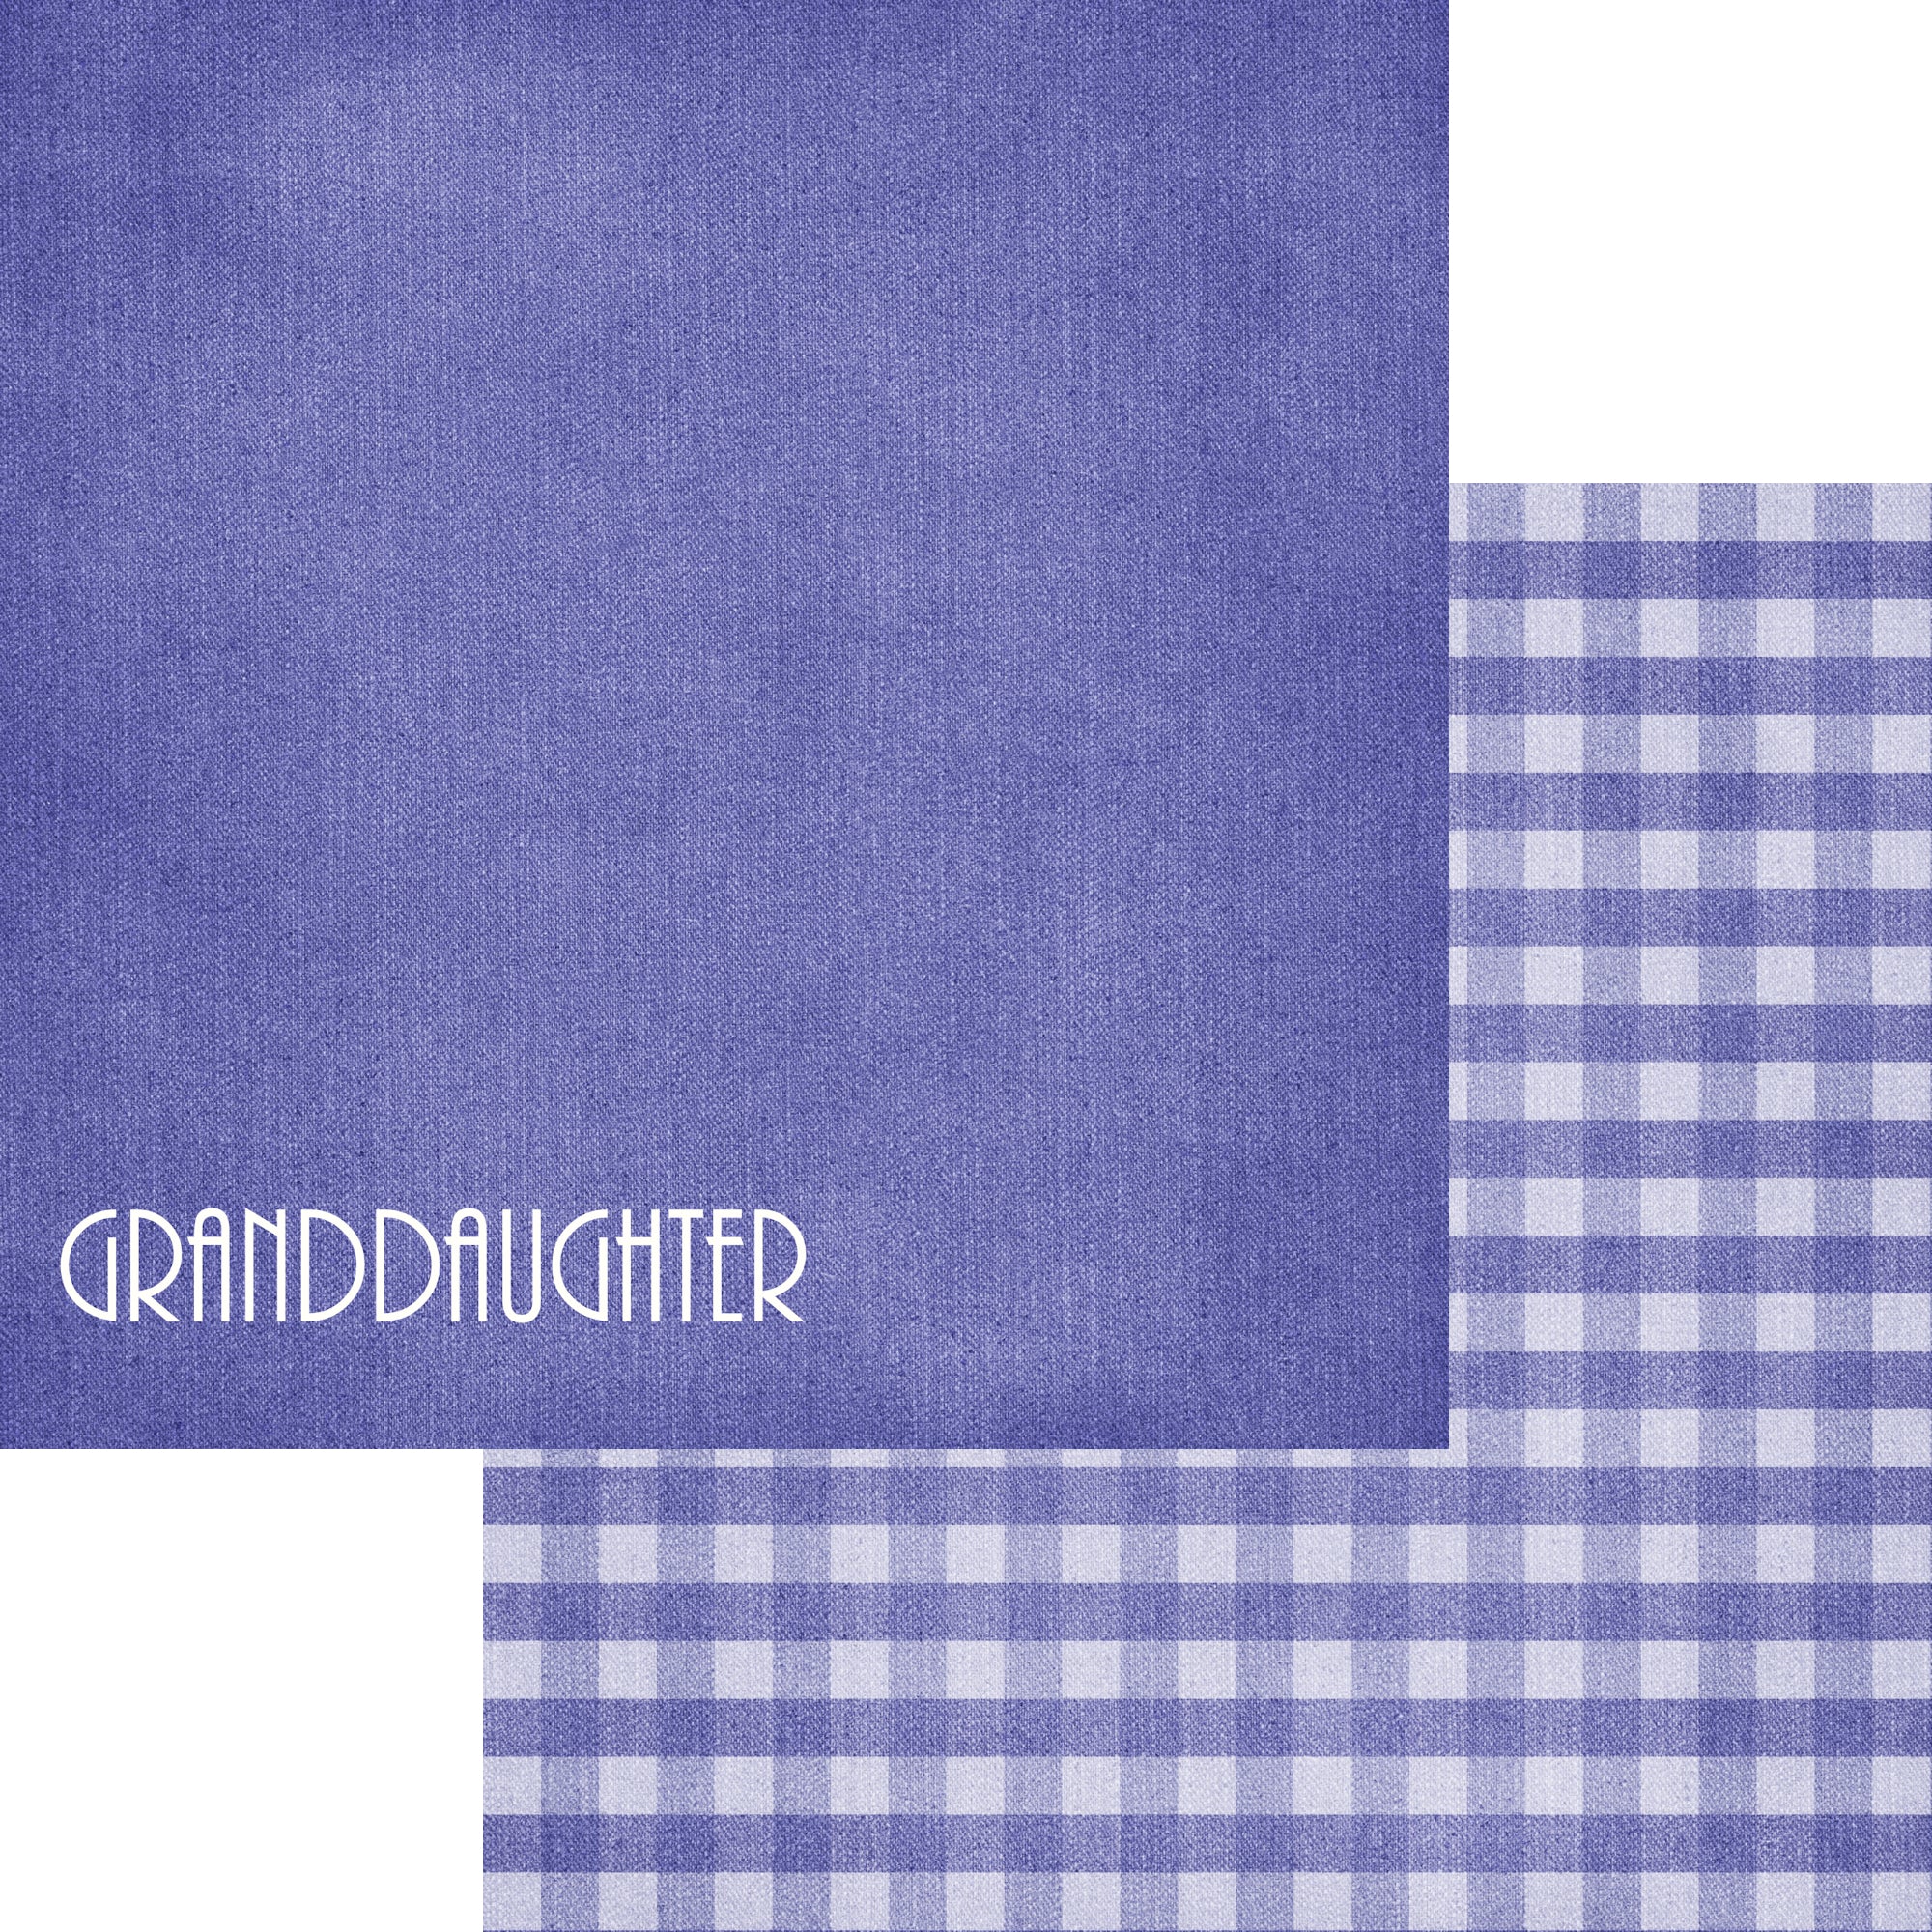 Family Collection Granddaughter 12 x 12 Double-Sided Scrapbook Paper by SSC Designs